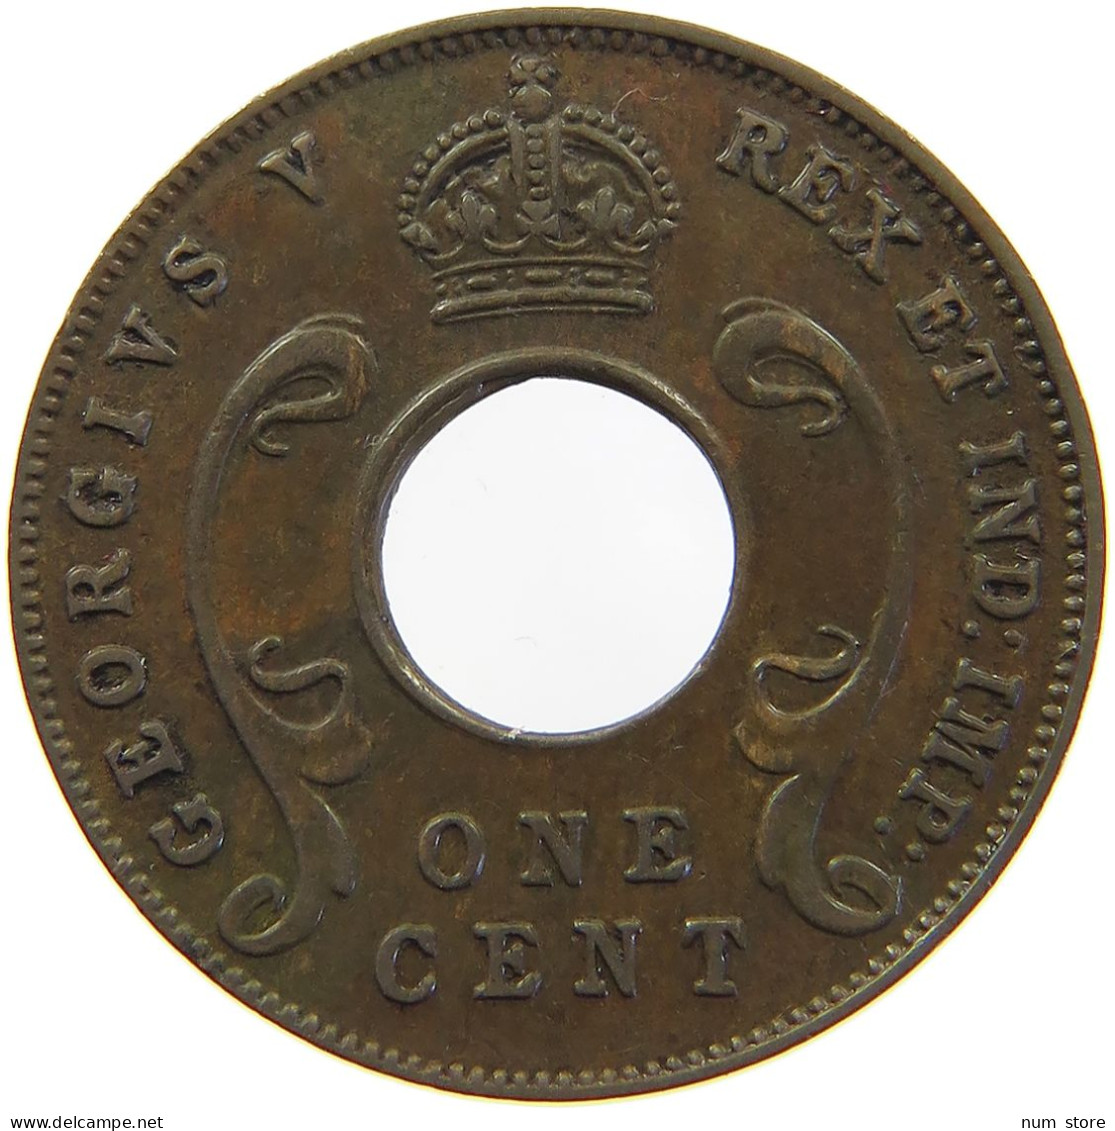 EAST AFRICA CENT 1930 GEORGE V. (1910-1936) #MA 065540 - Colonie Britannique